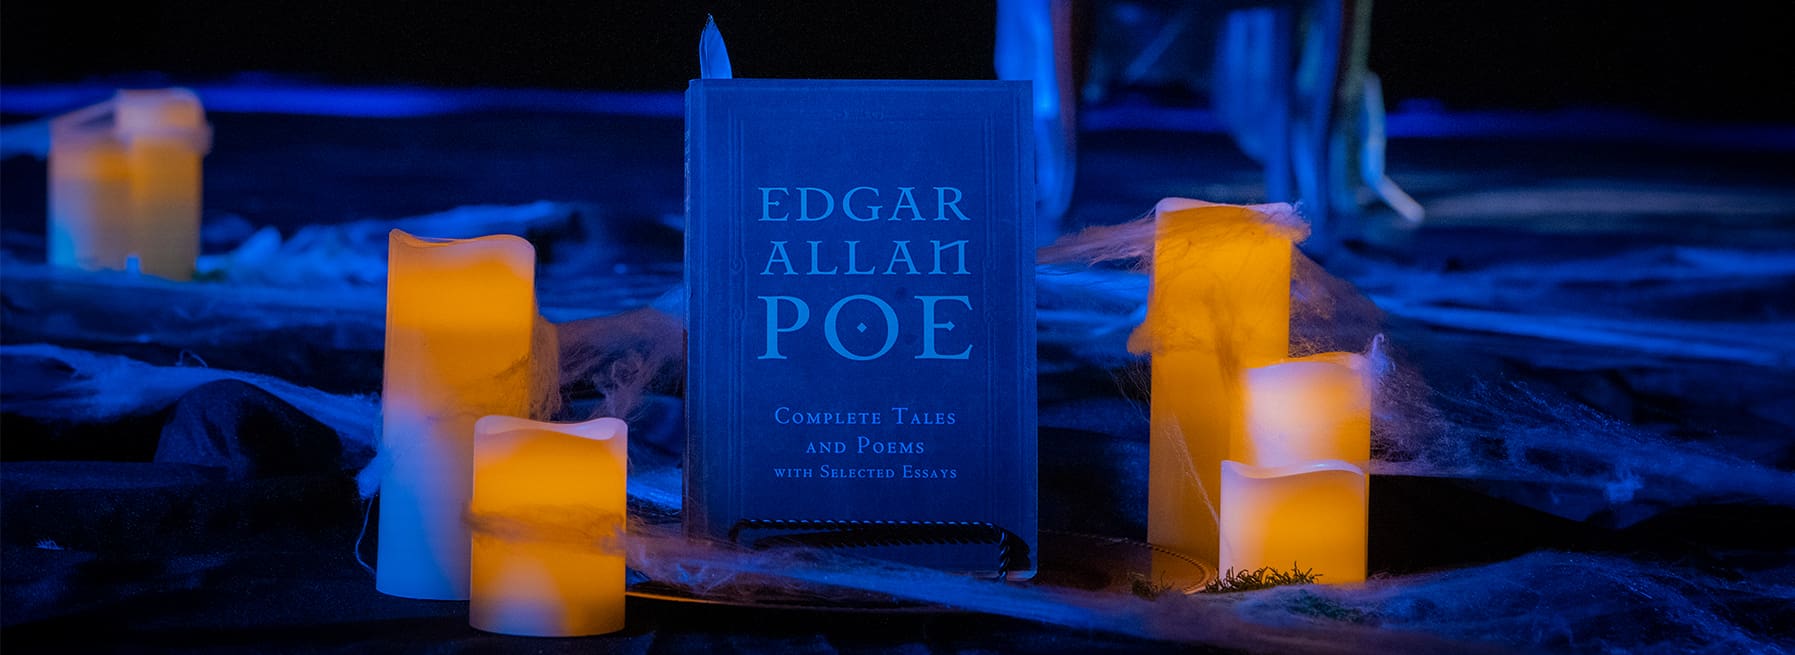 Candles surrounding Edgar Allan Poe's "Complete Tales and Poems with Selected Essays"